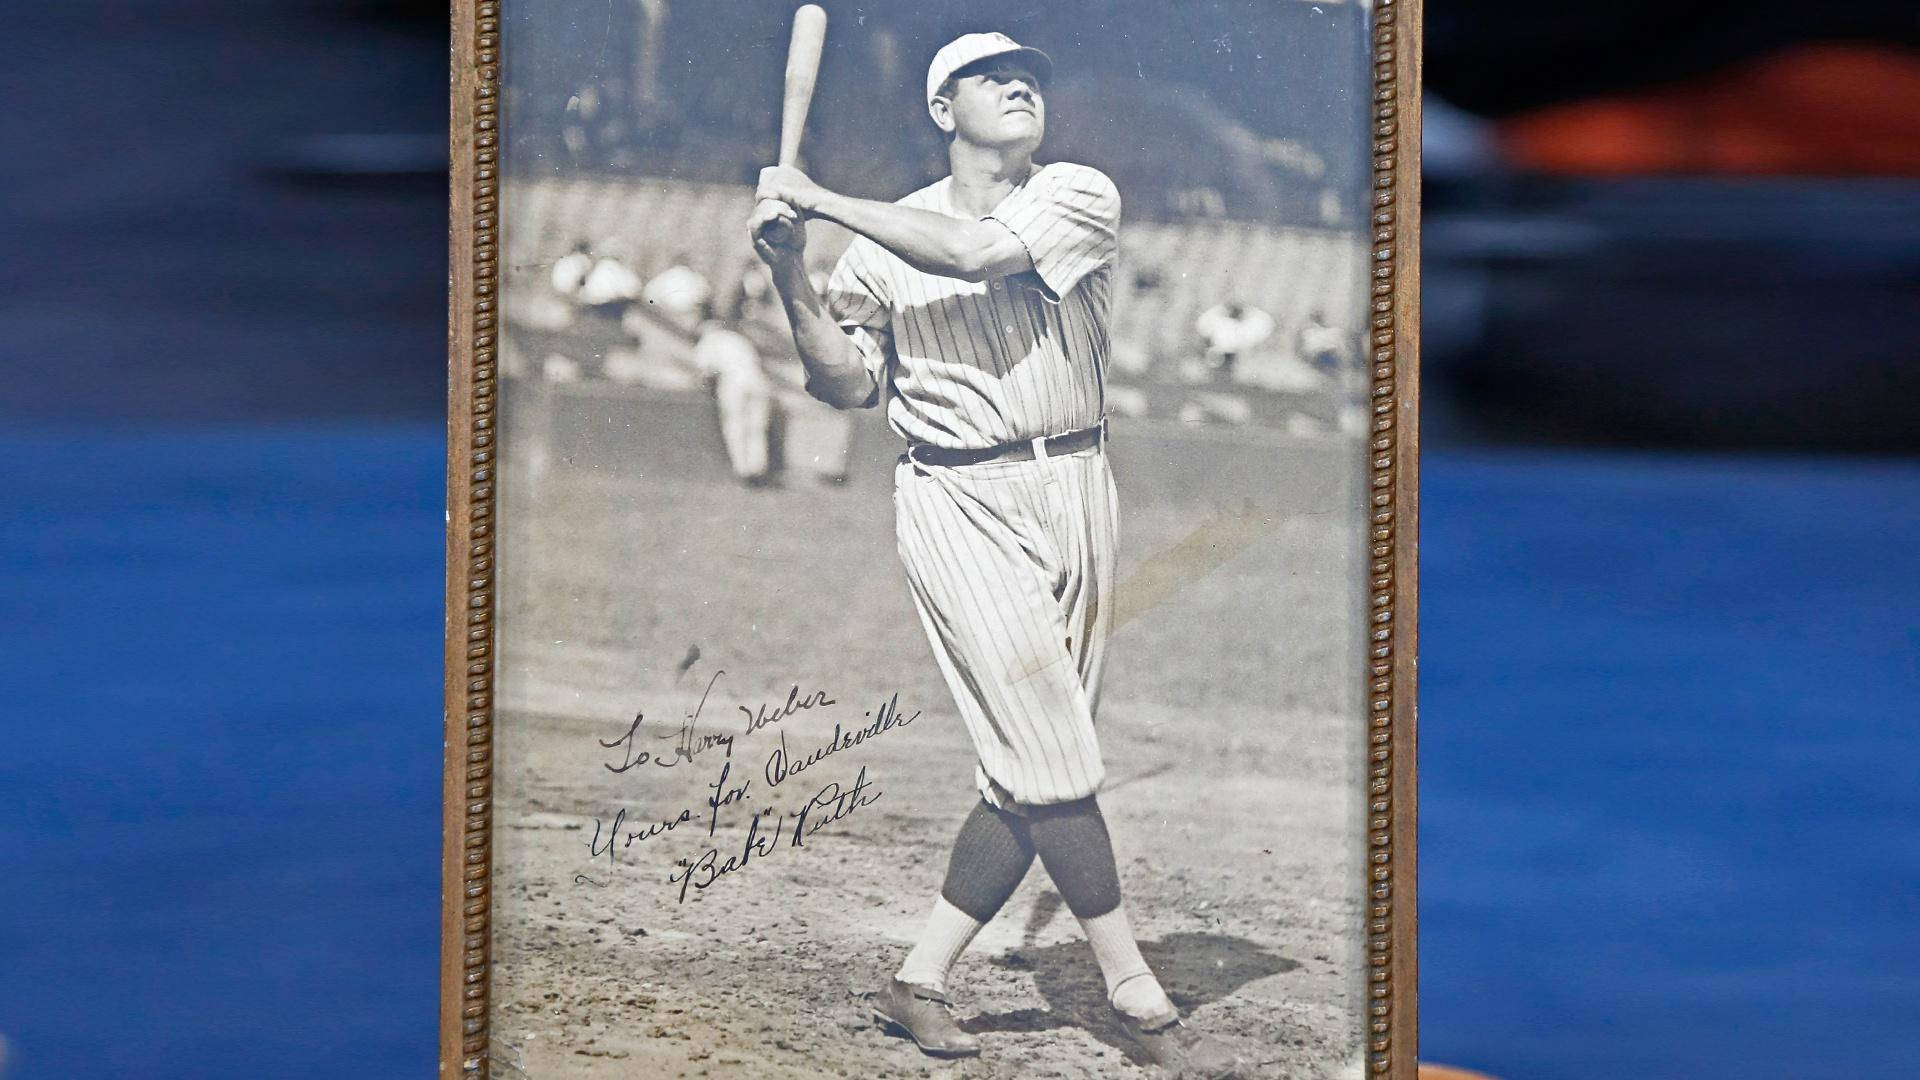 Babe Ruth Portrait With Signature Background